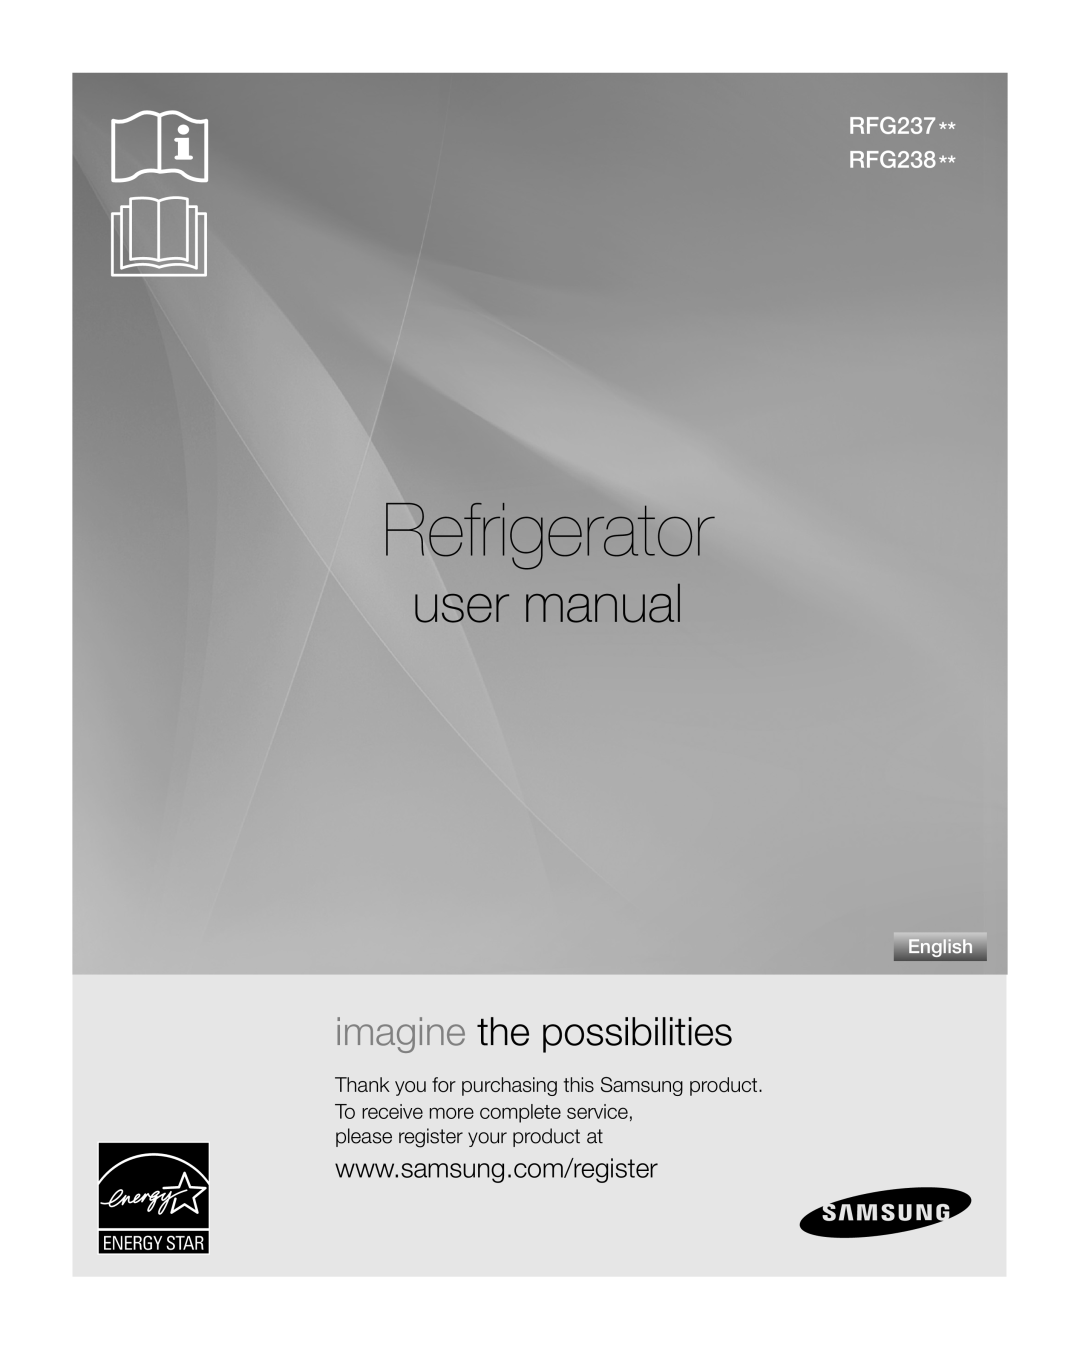 Samsung user manual imagine the possibilities, Refrigerator, RFG237 RFG238, please register your product at, English 